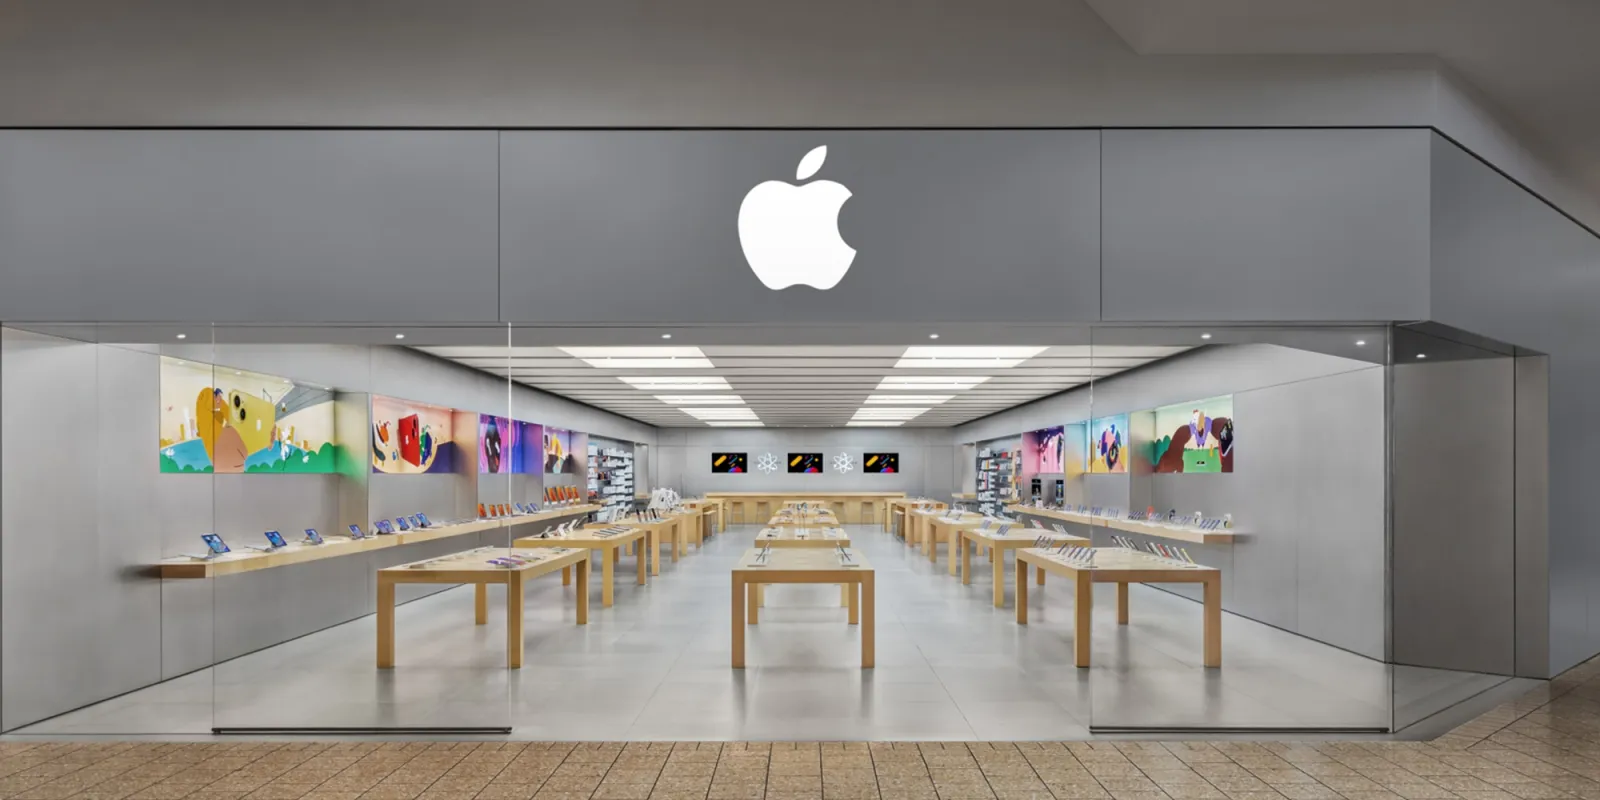 New Jersey Apple Store Workers Are Currently Trying To Form a Union